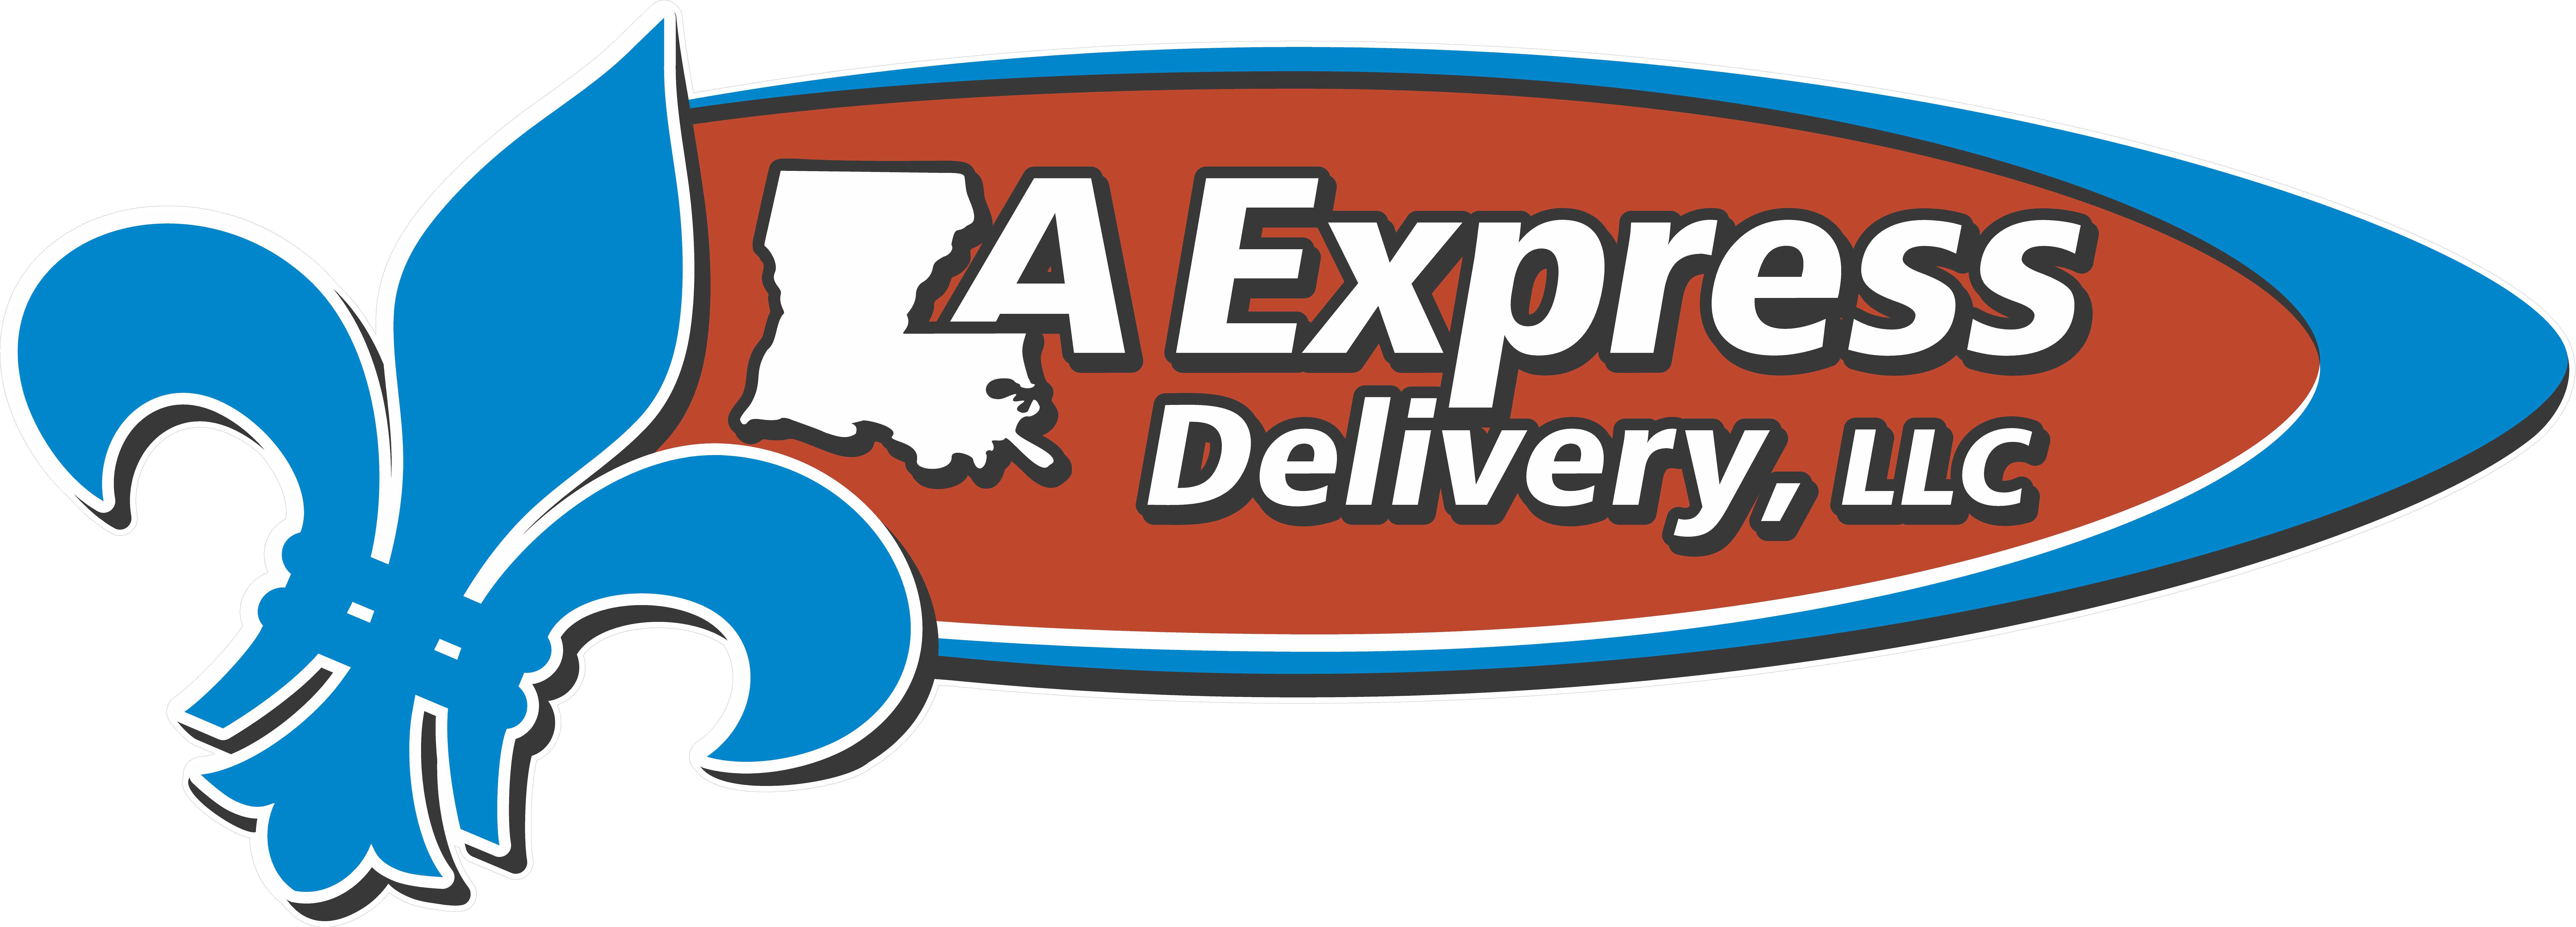 Louisiana Express Delivery